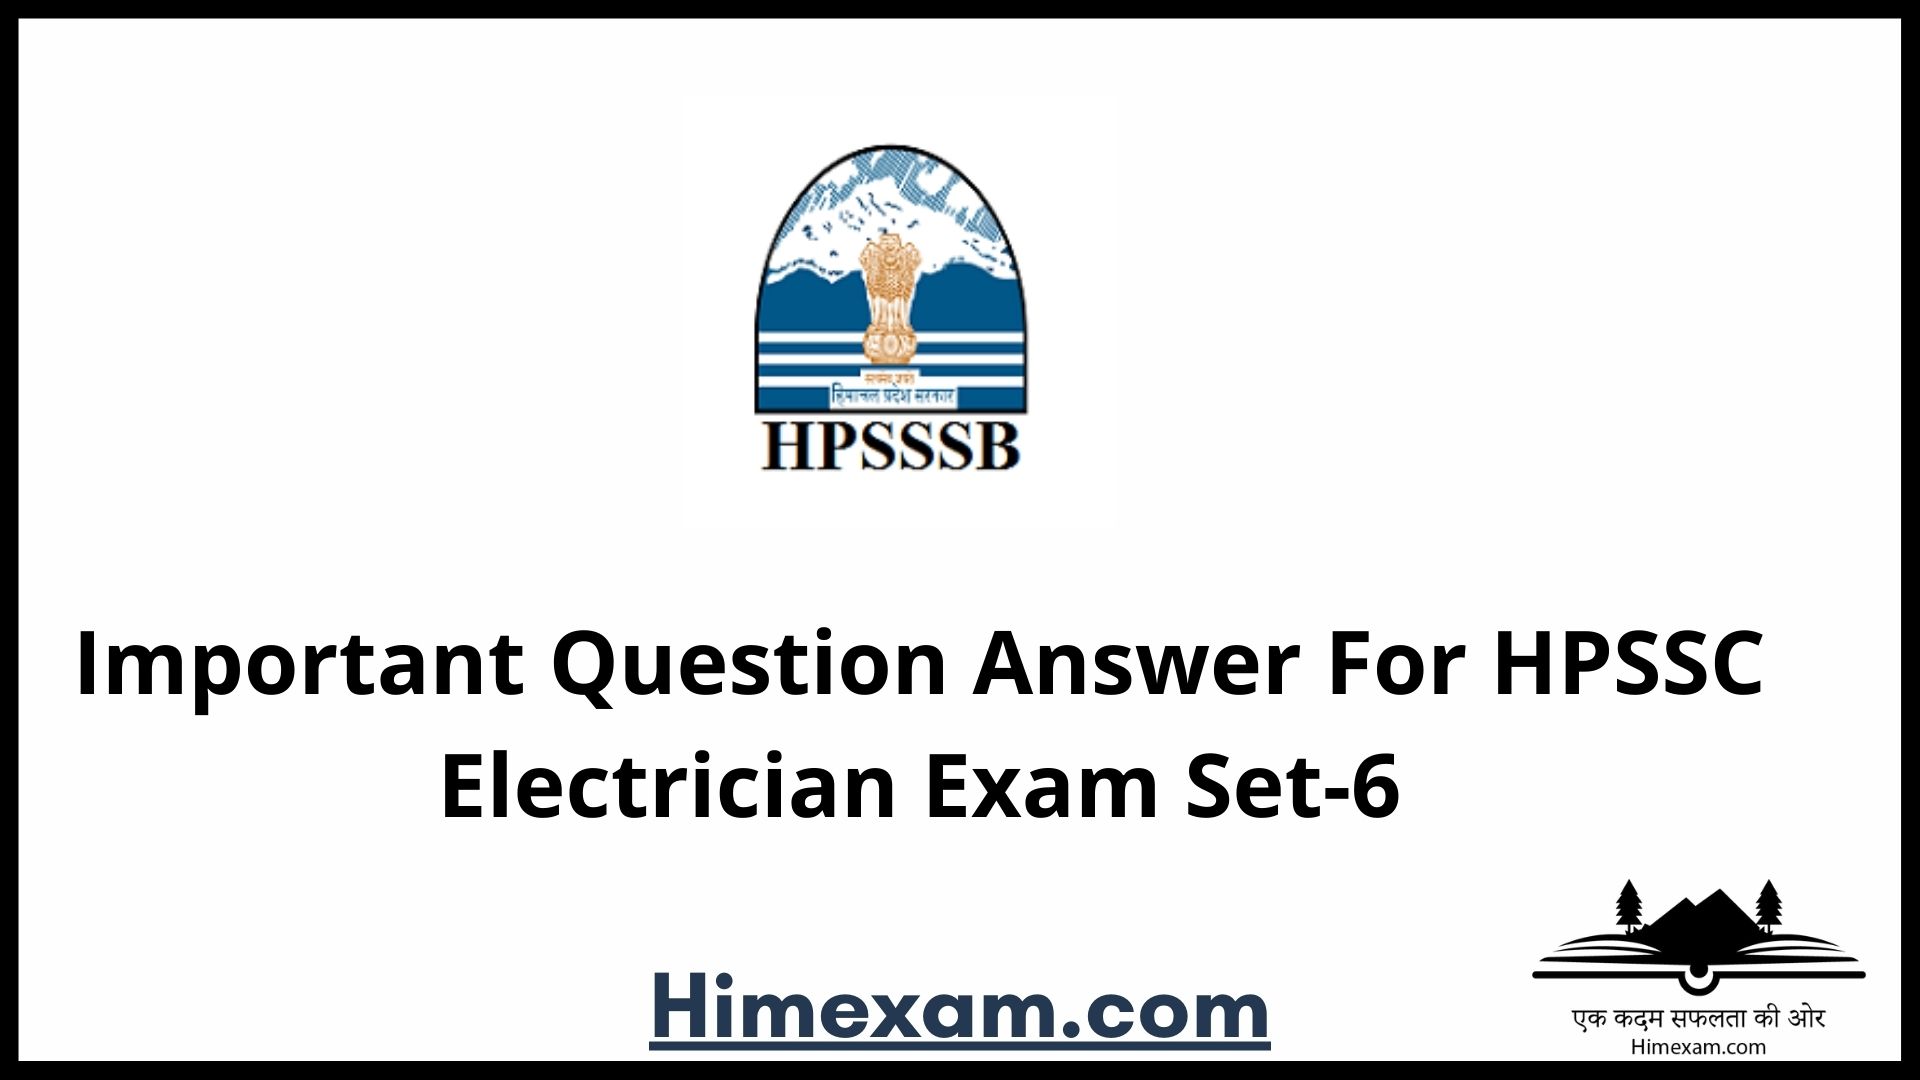 Important Question Answer For HPSSC Electrician Exam Set-6